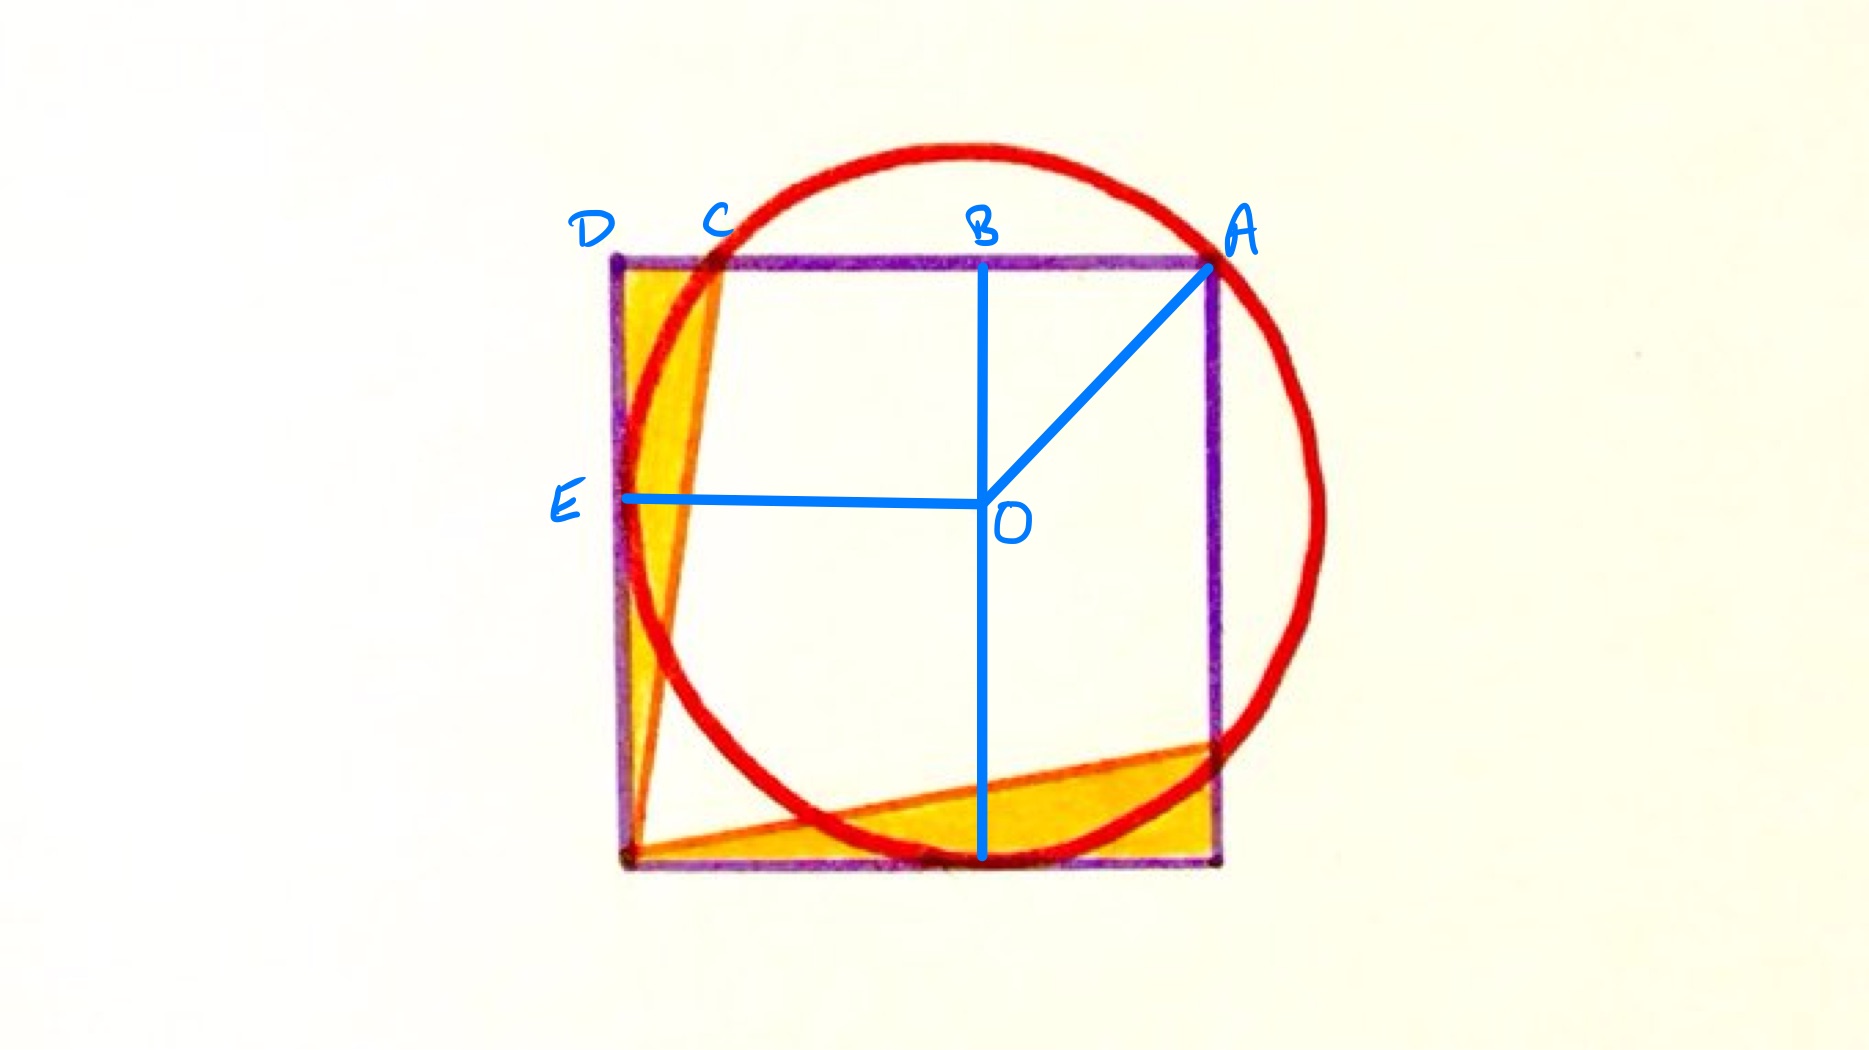 Square overlapping a circle labelled